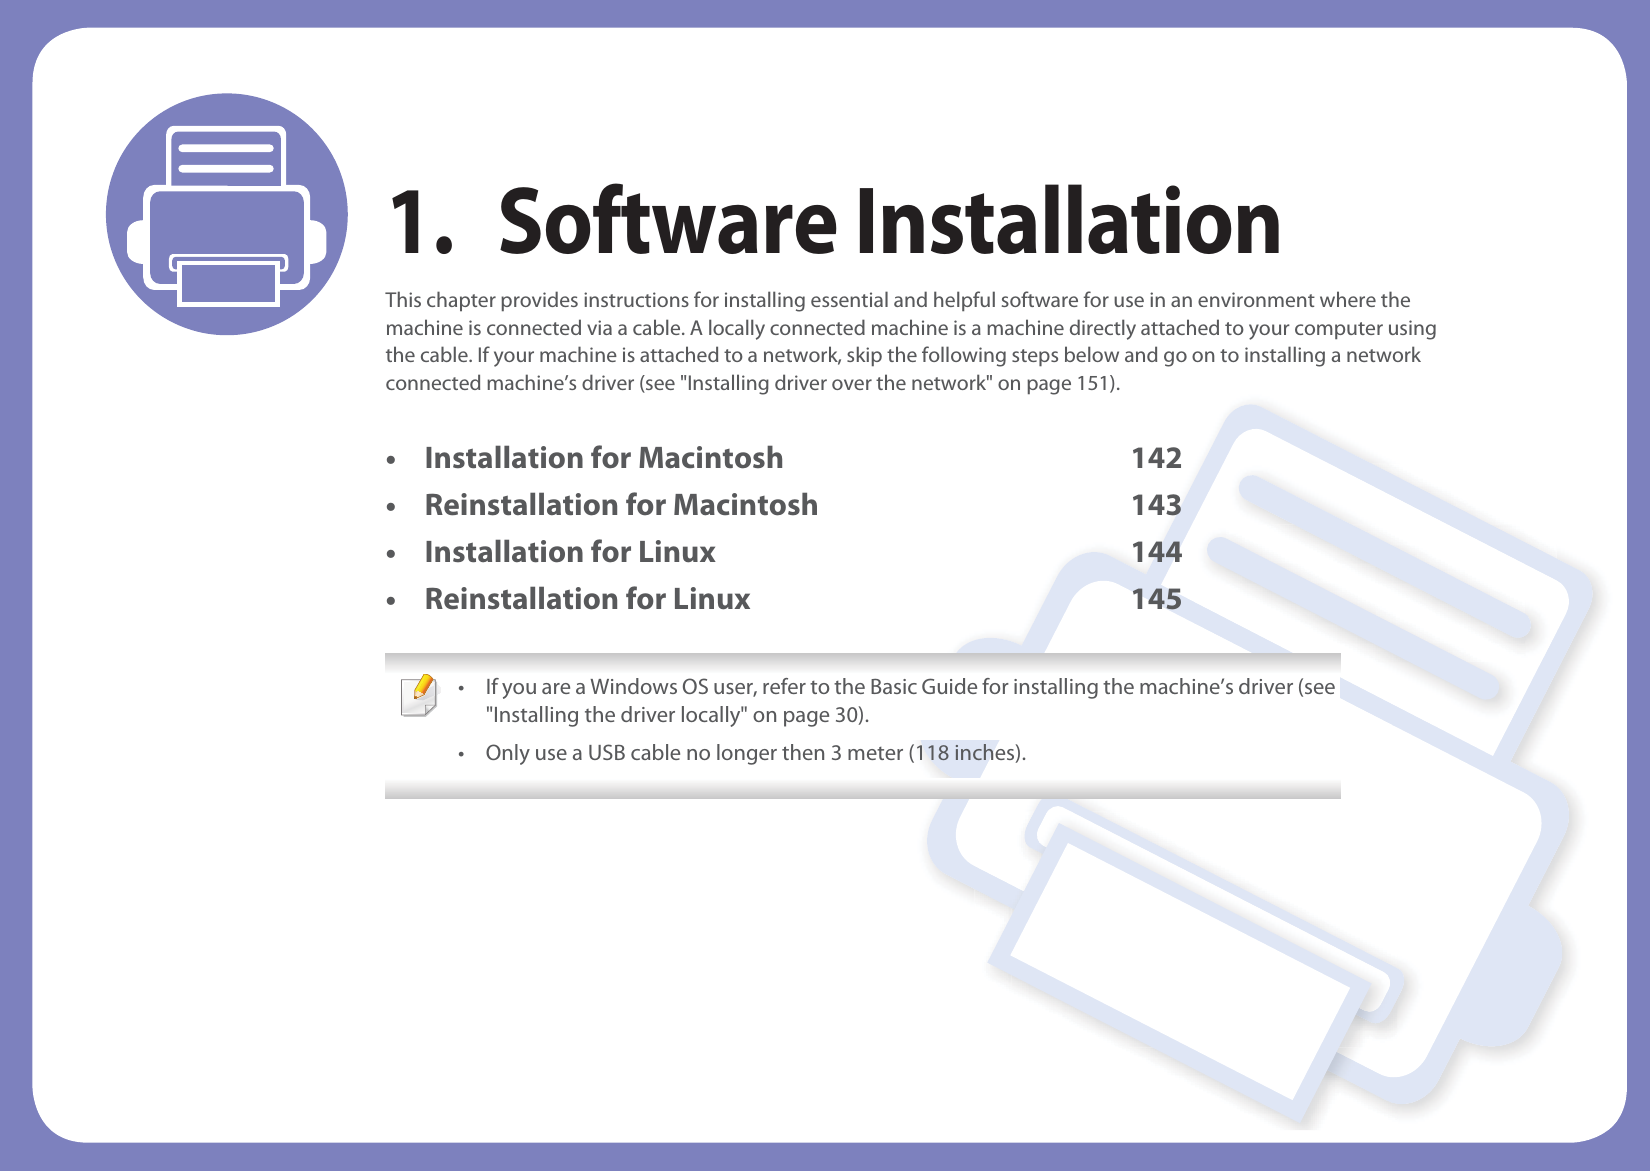 1. Software InstallationThis chapter provides instructions for installing essential and helpful software for use in an environment where the machine is connected via a cable. A locally connected machine is a machine directly attached to your computer using the cable. If your machine is attached to a network, skip the following steps below and go on to installing a network connected machine’s driver (see &quot;Installing driver over the network&quot; on page 151).• Installation for Macintosh 142• Reinstallation for Macintosh 143• Installation for Linux 144• Reinstallation for Linux 145 • If you are a Windows OS user, refer to the Basic Guide for installing the machine’s driver (see &quot;Installing the driver locally&quot; on page 30).• Only use a USB cable no longer then 3 meter (118 inches). 